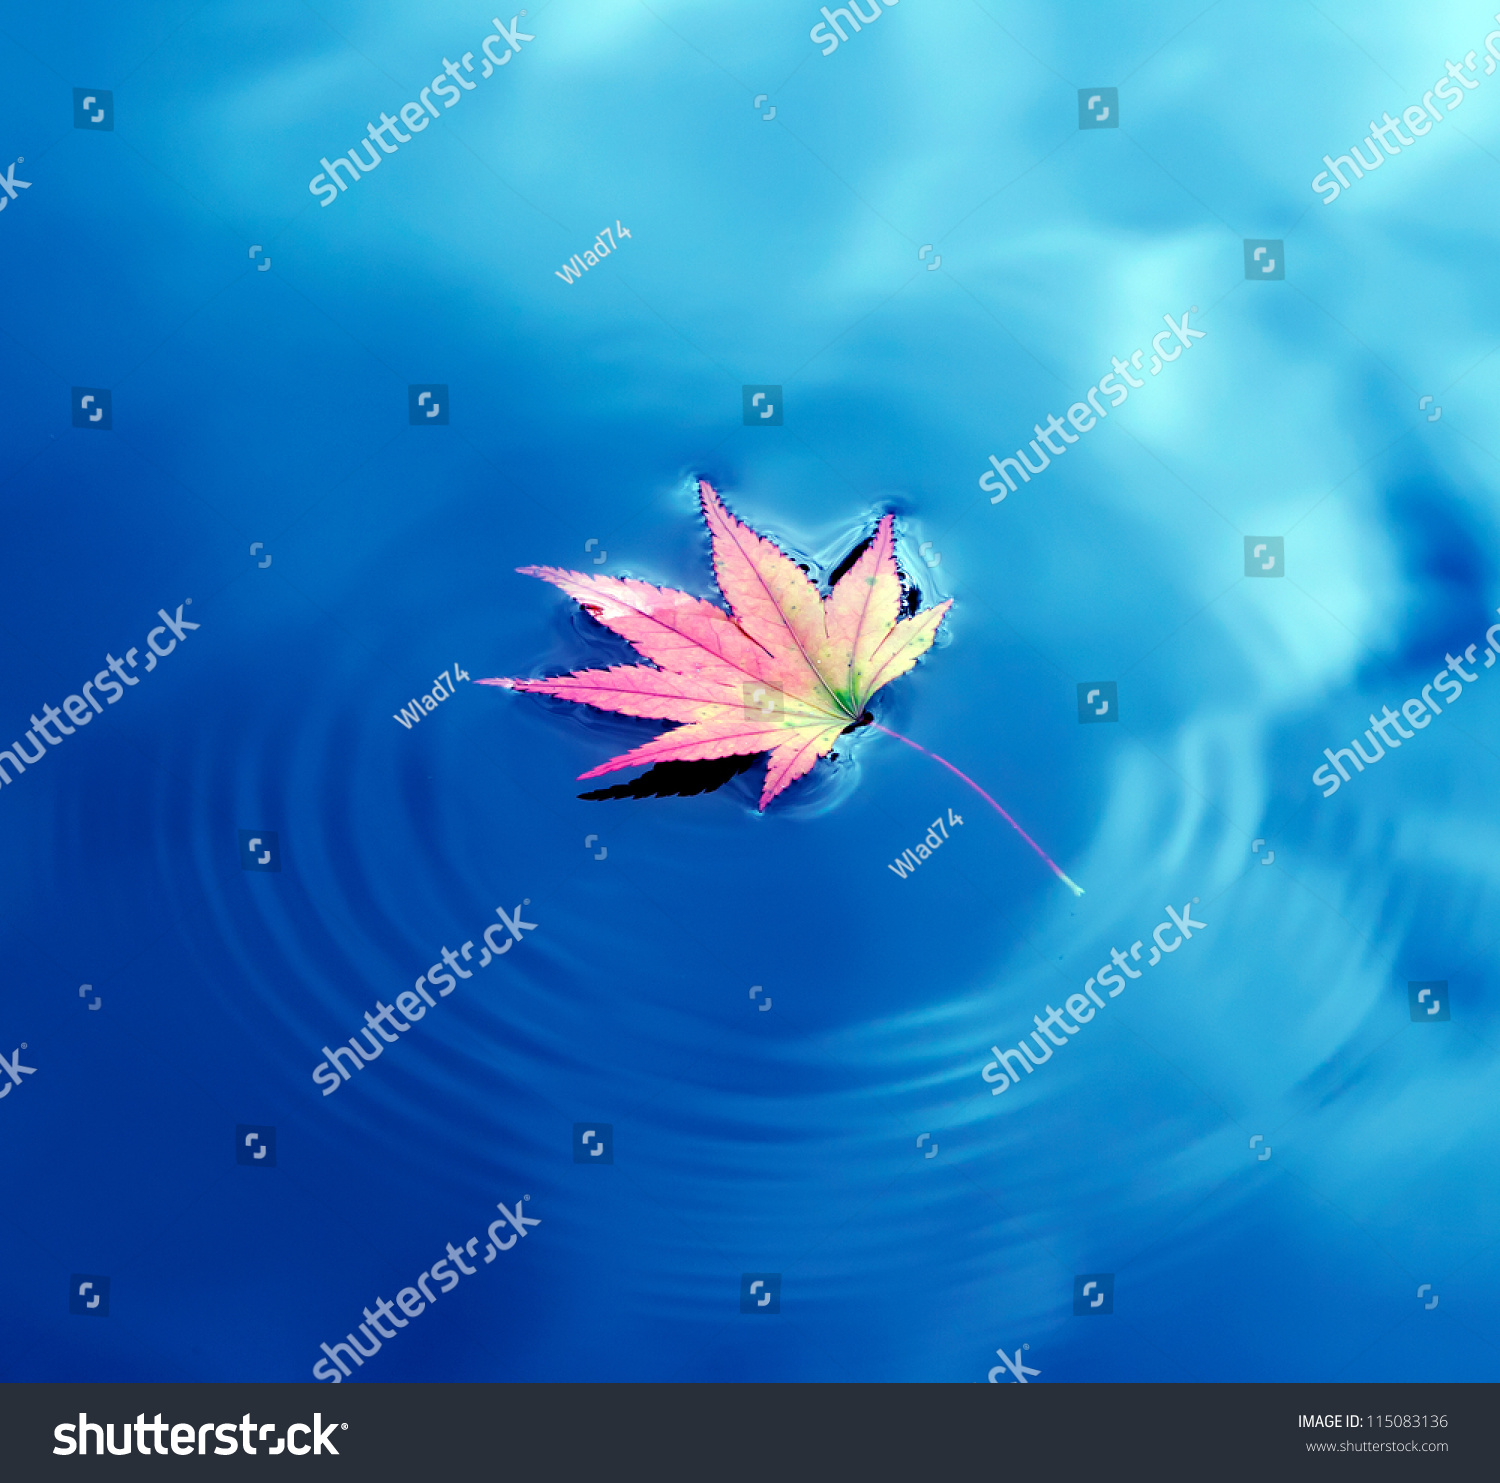 Autumn Maple Leaf On Water Stock Photo (Royalty Free) 115083136 ...